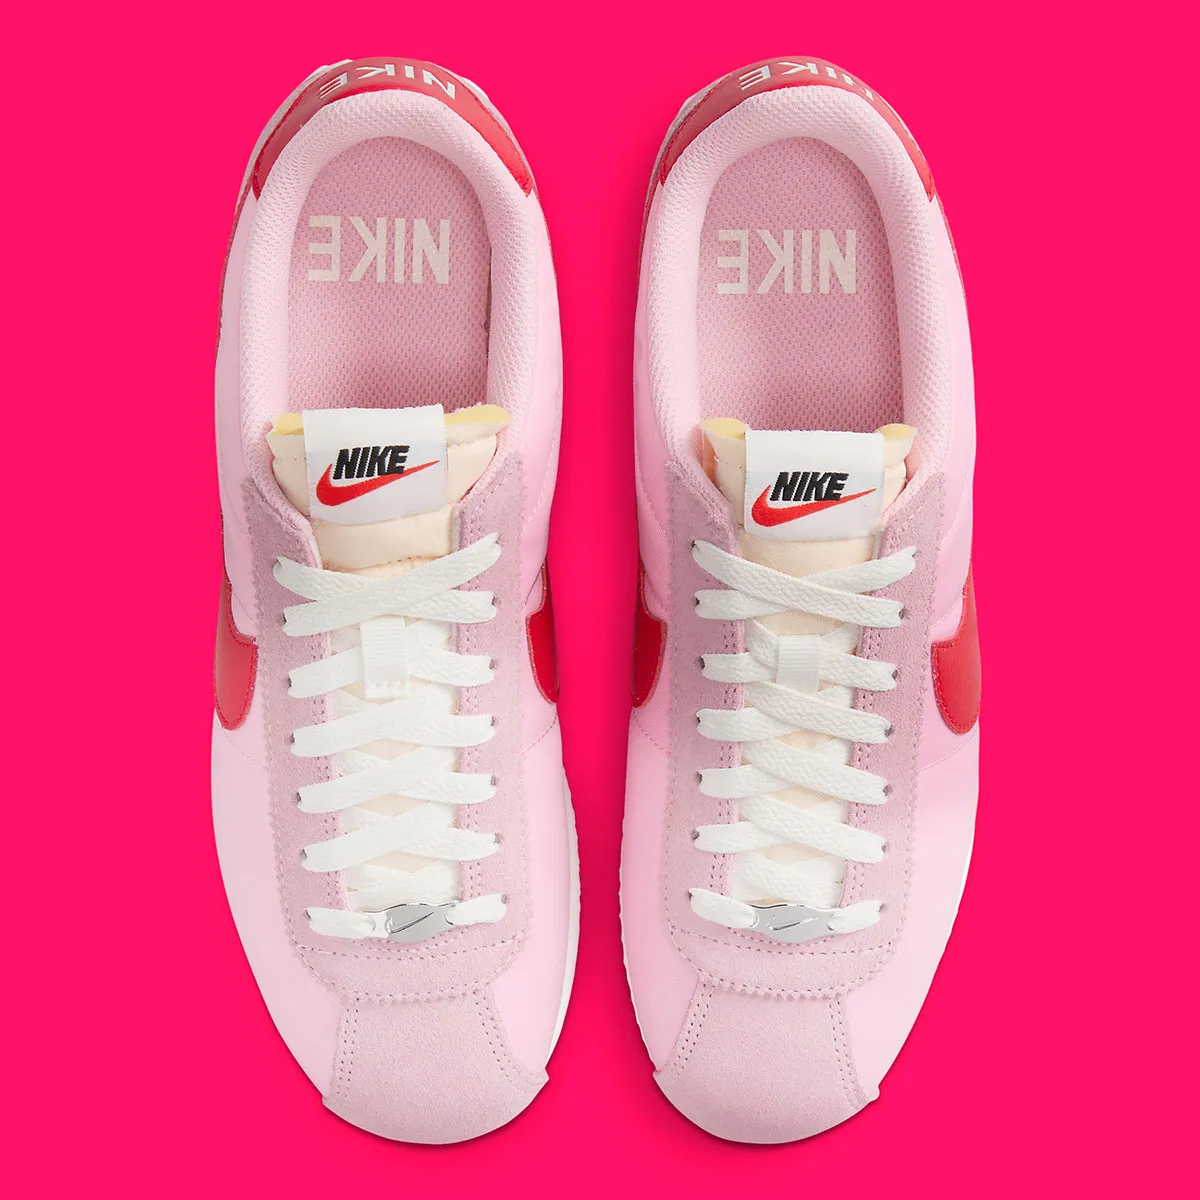 Blossom in Style: Nike Cortez "Medium Soft Pink" Makes a Statement